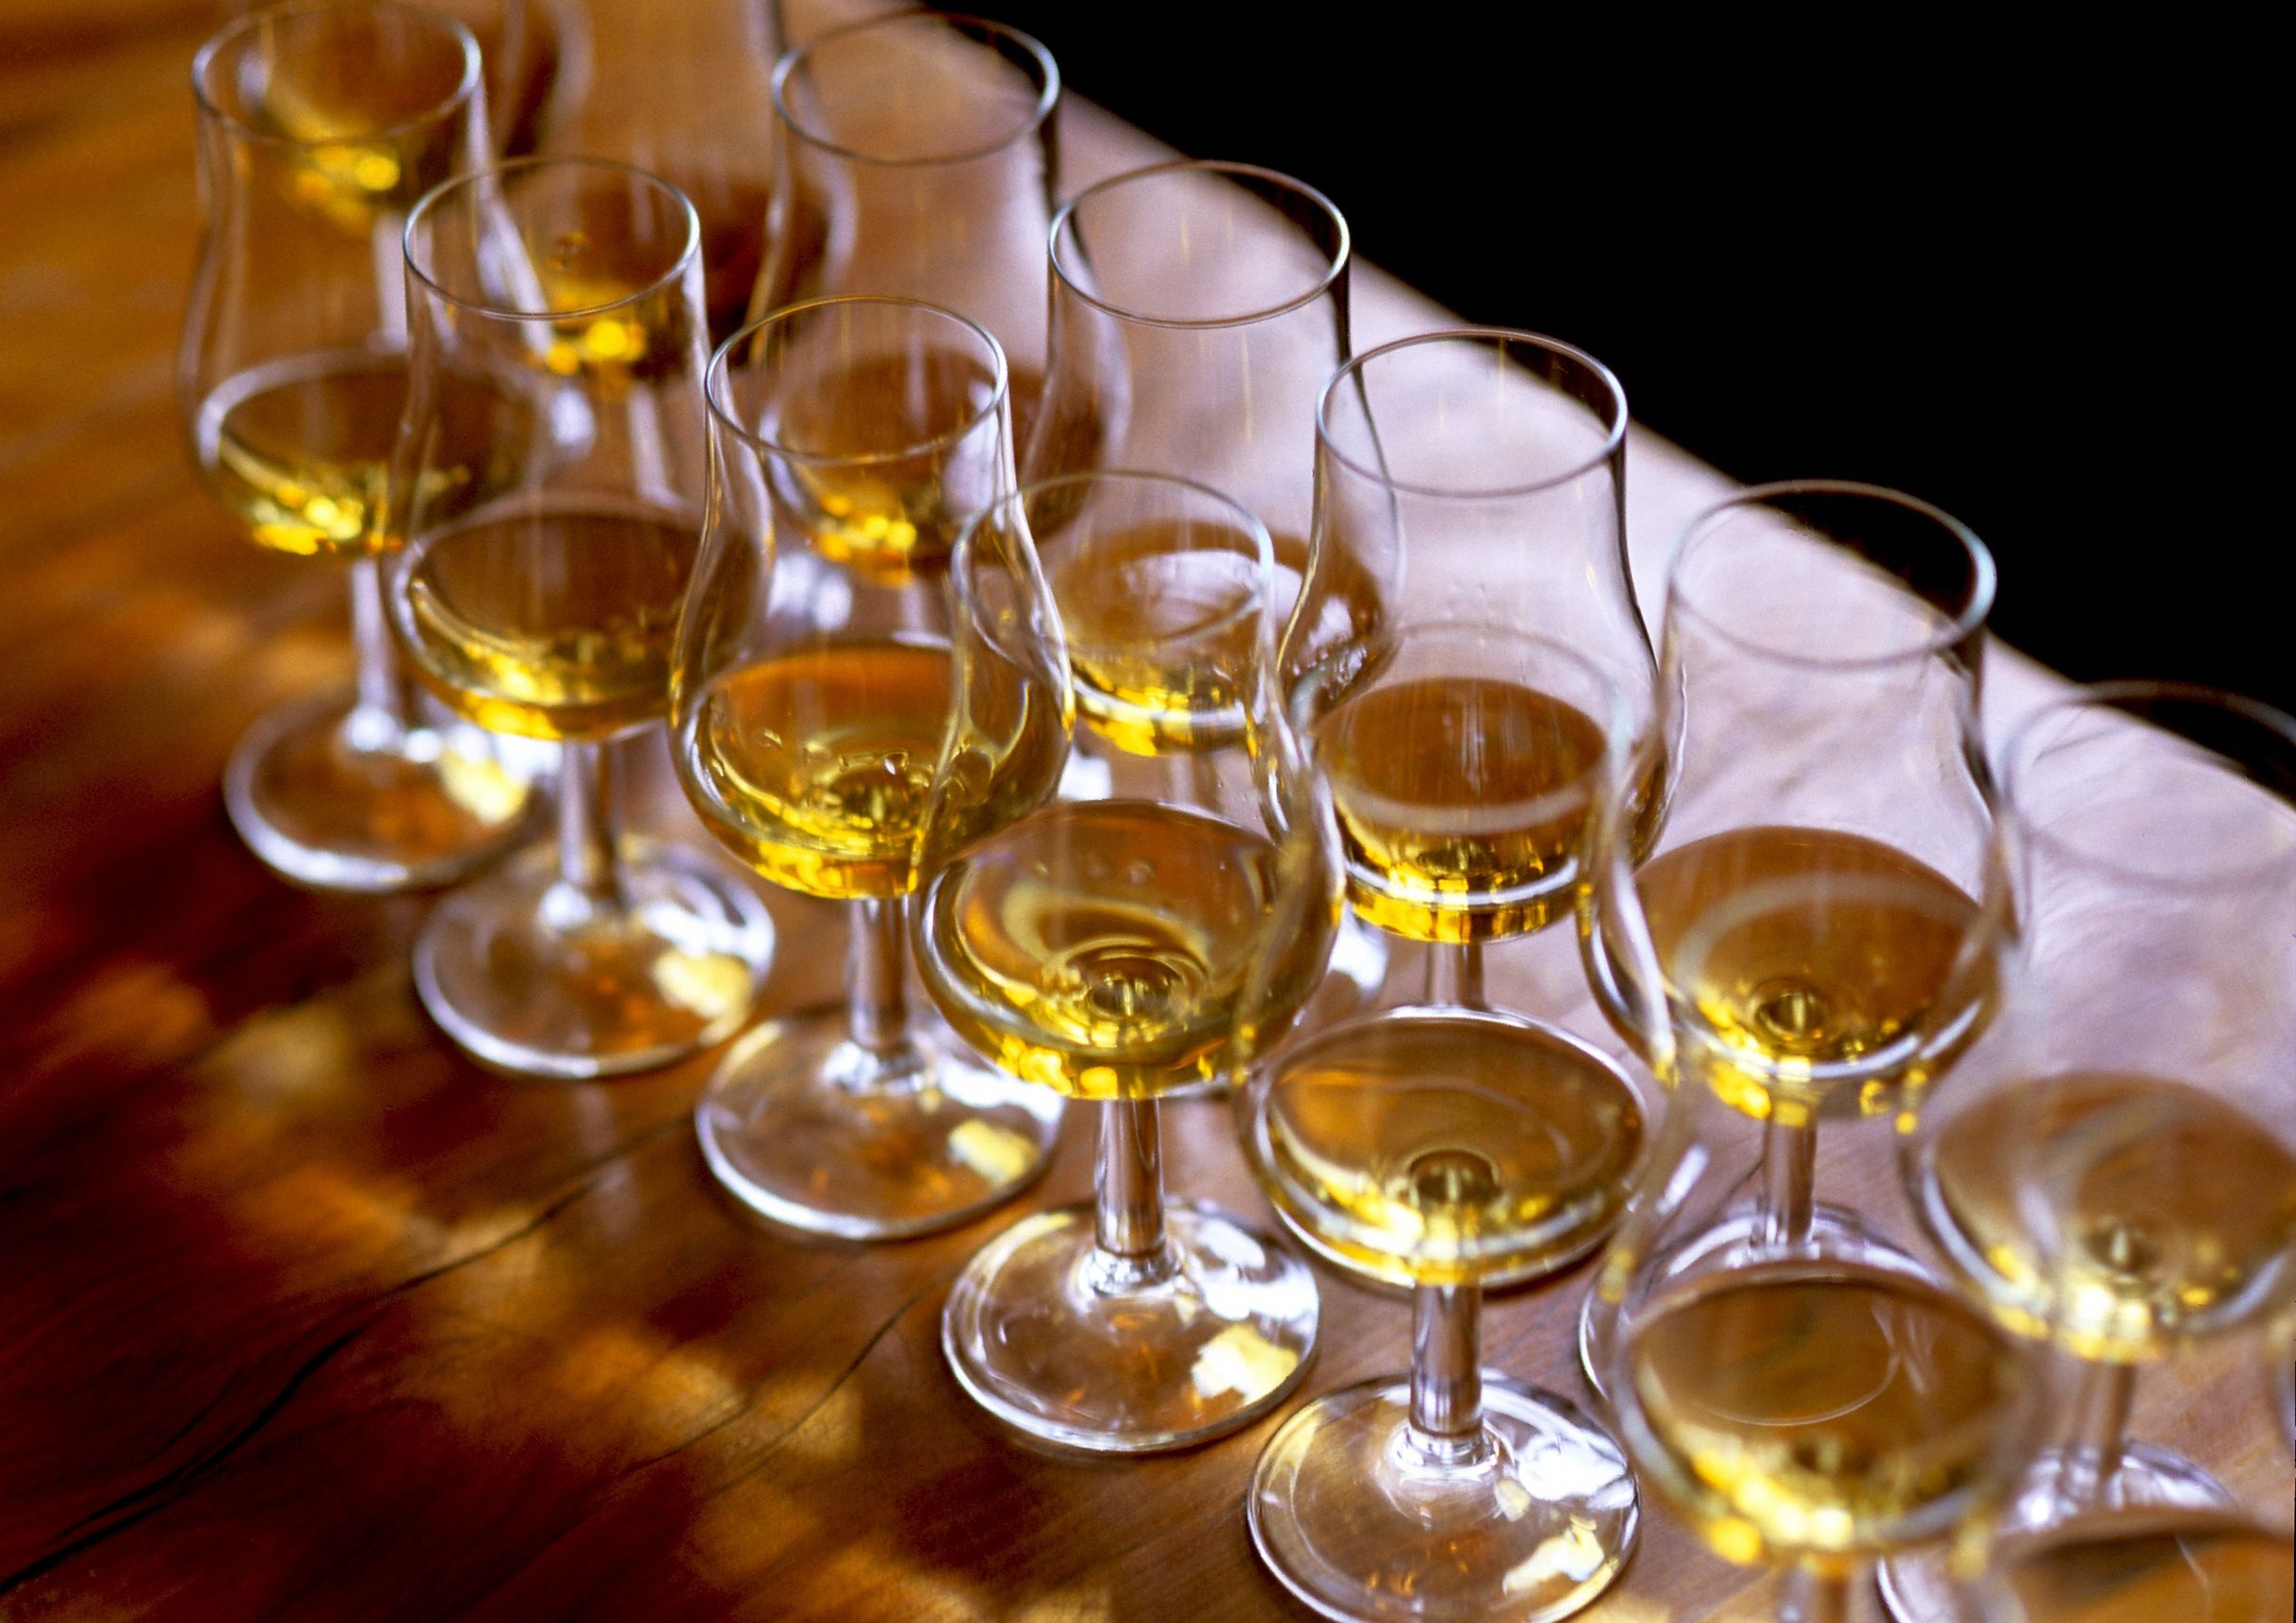 How Do I Love Whiskey? Let Me Count the Ways…